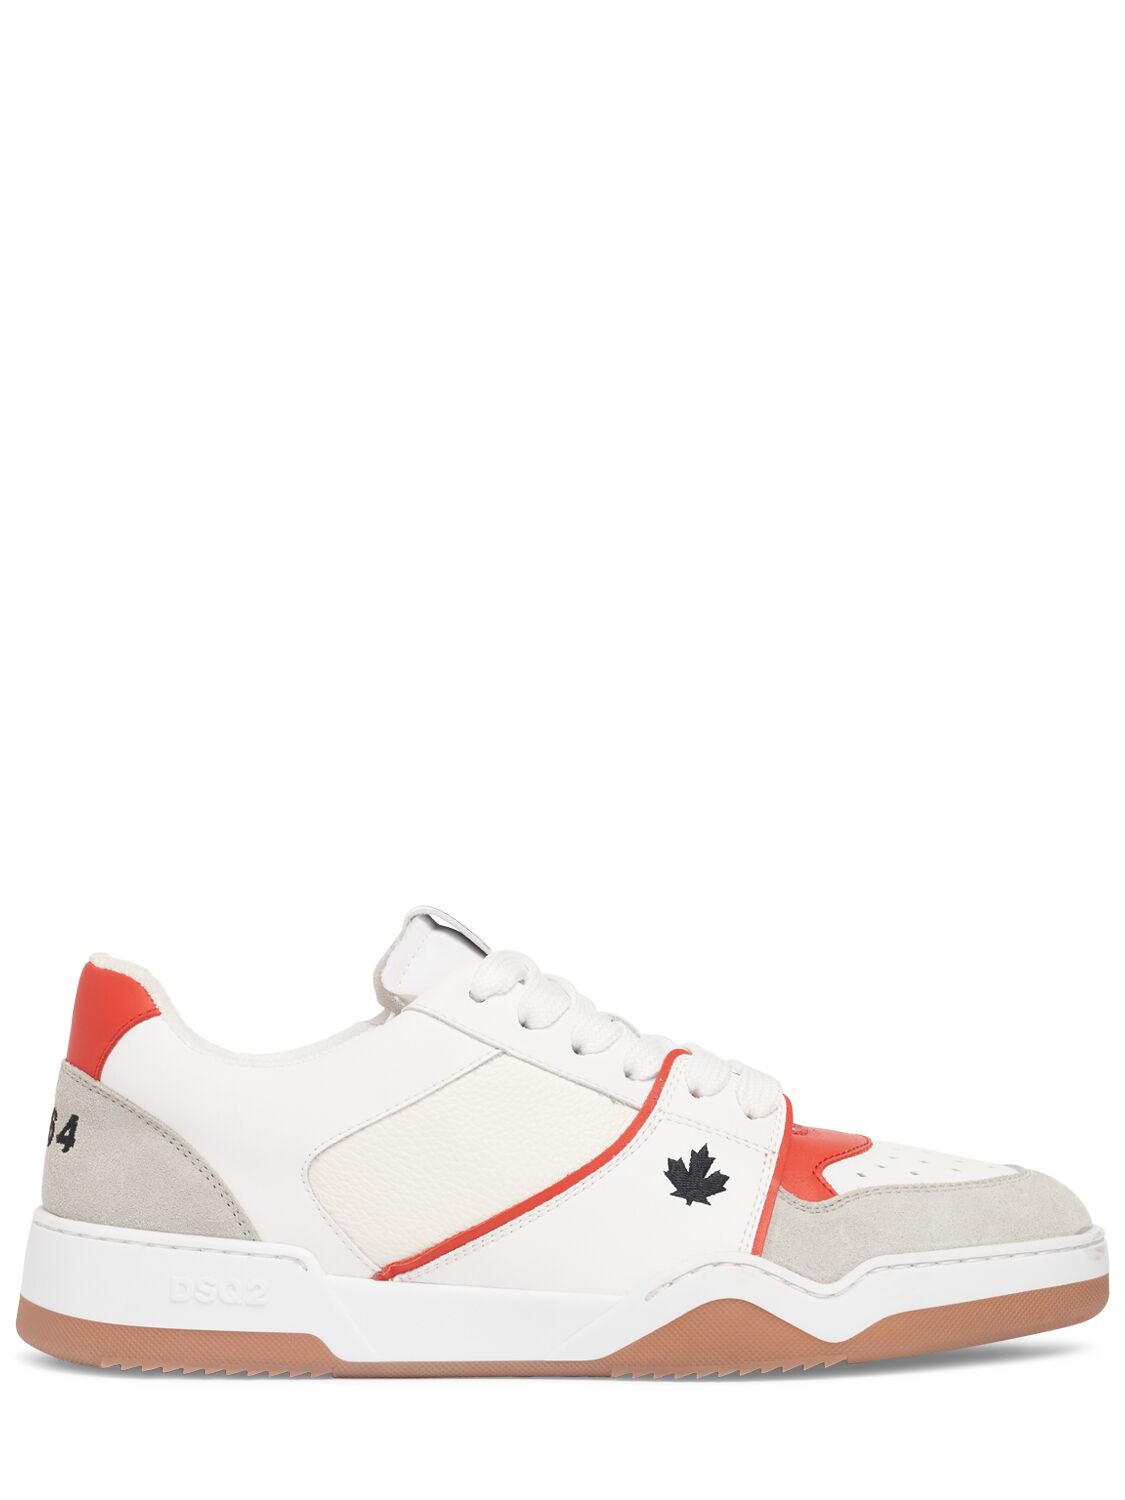 Dsquared2 Logo Leather Sneakers In White,red